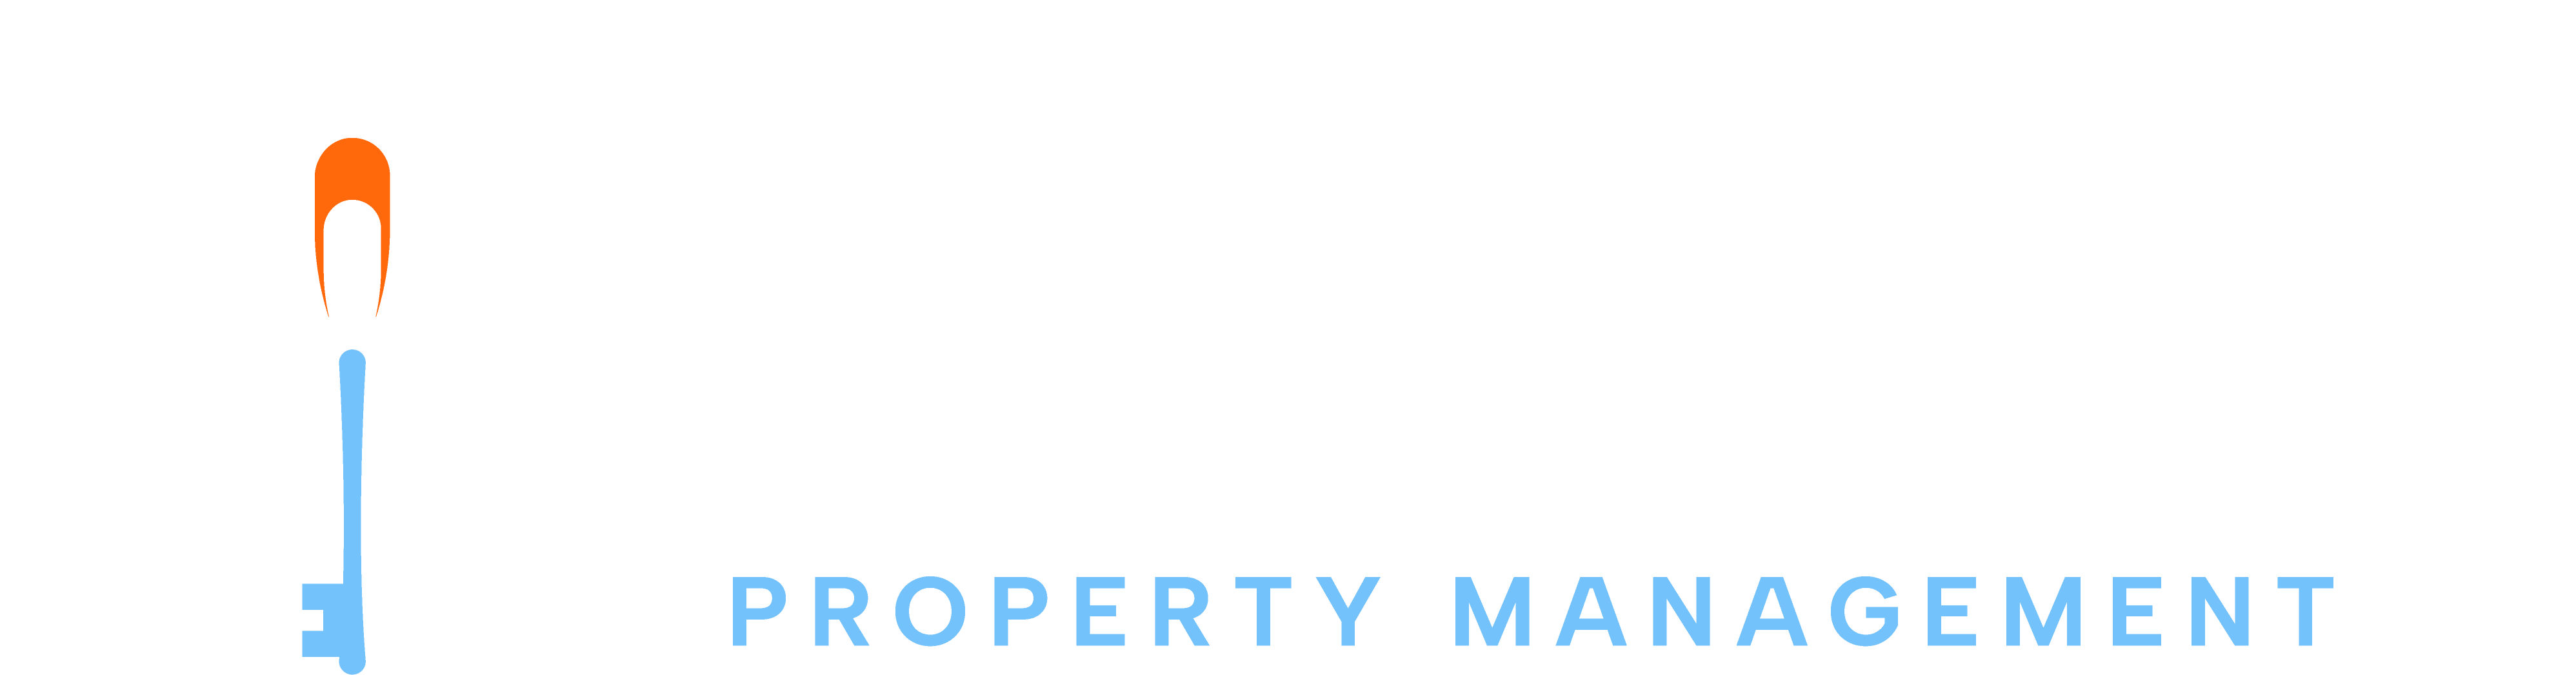 Dragonfly Property Management